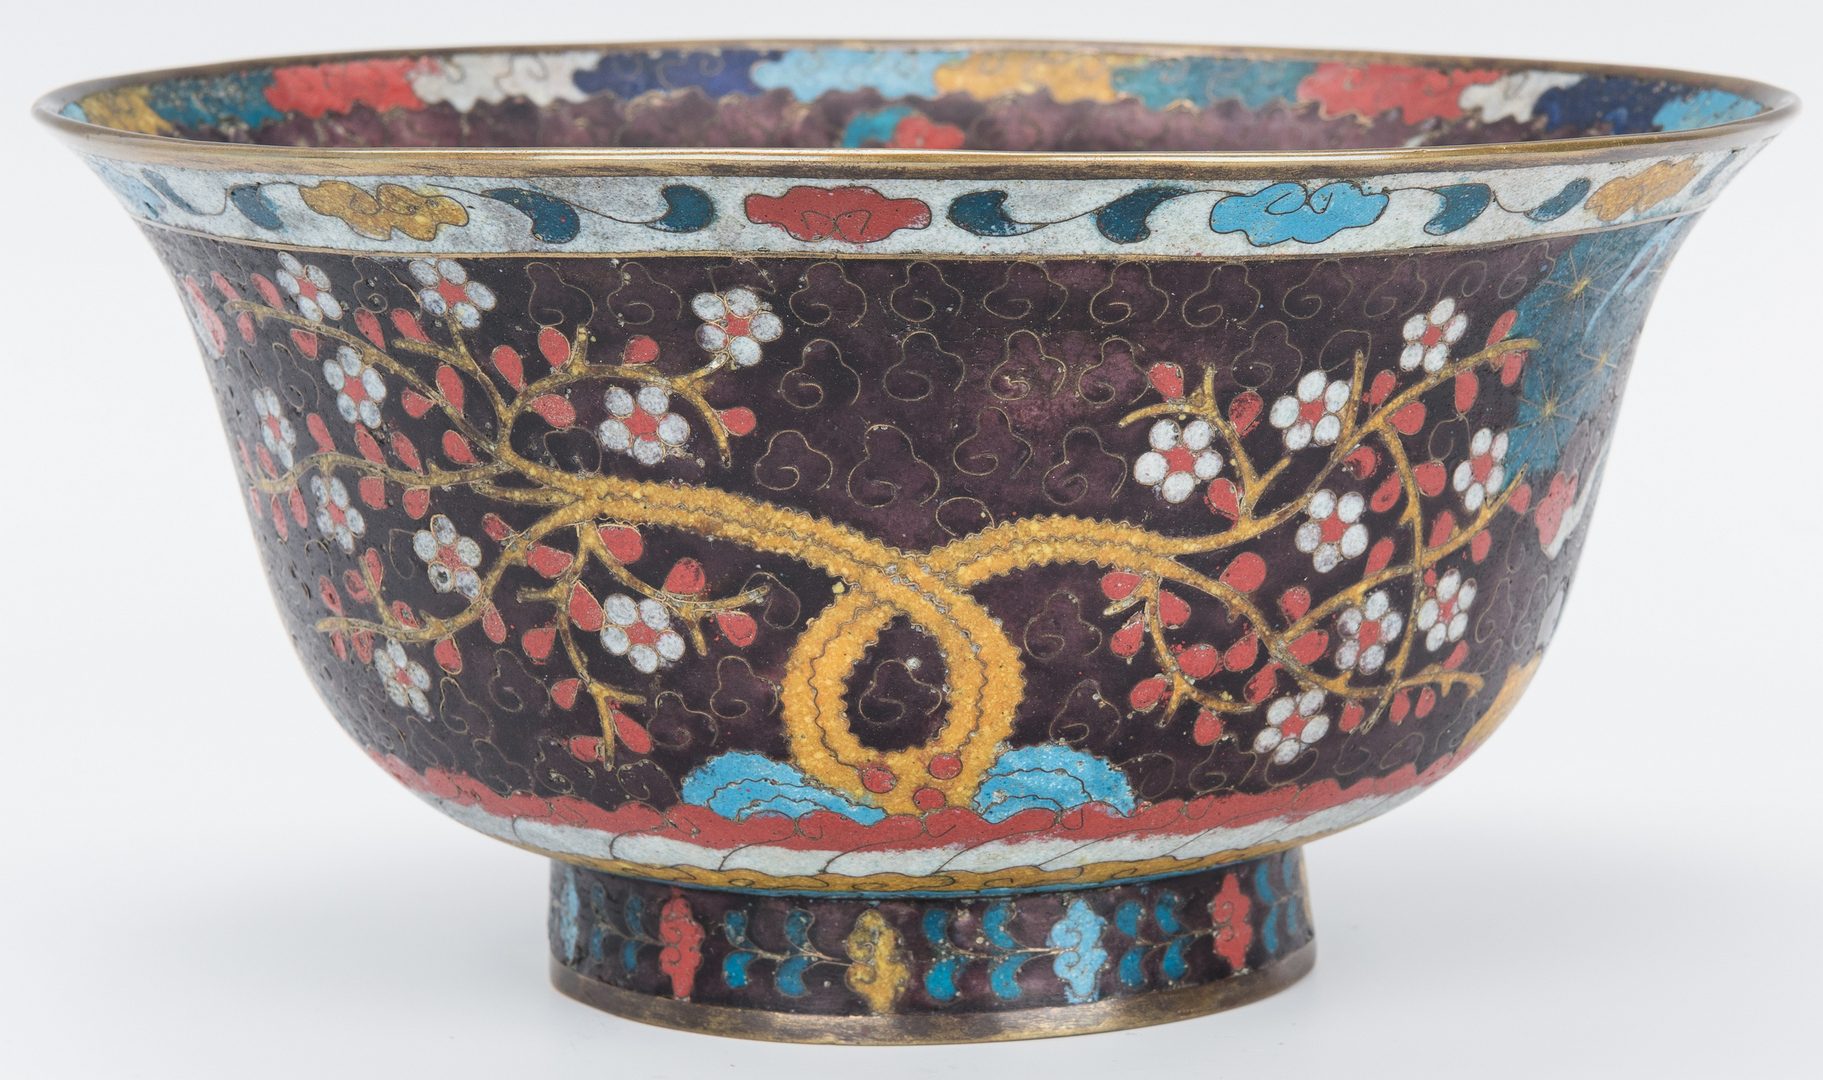 Lot 2: Cloisonne bowl with Horses, Urn, Box, 3 items